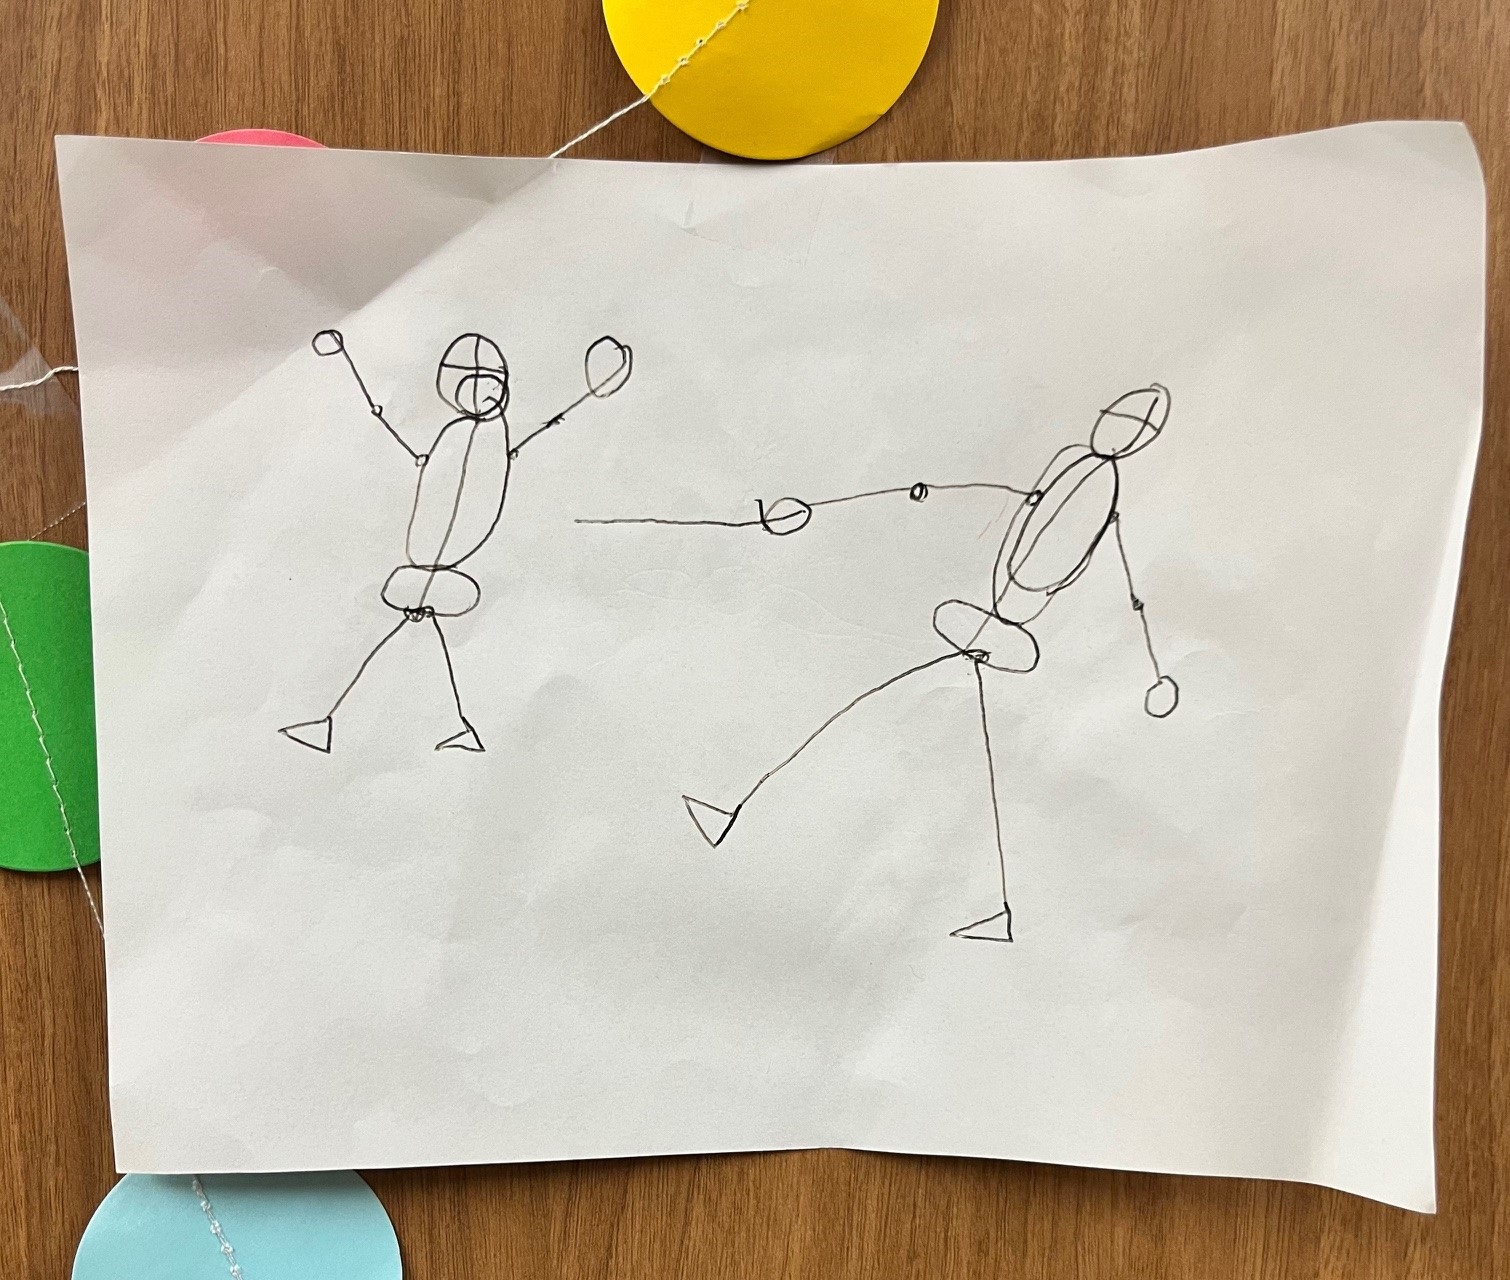 Two human figures made out of lines and rudimentary shapes appear to be fencing.